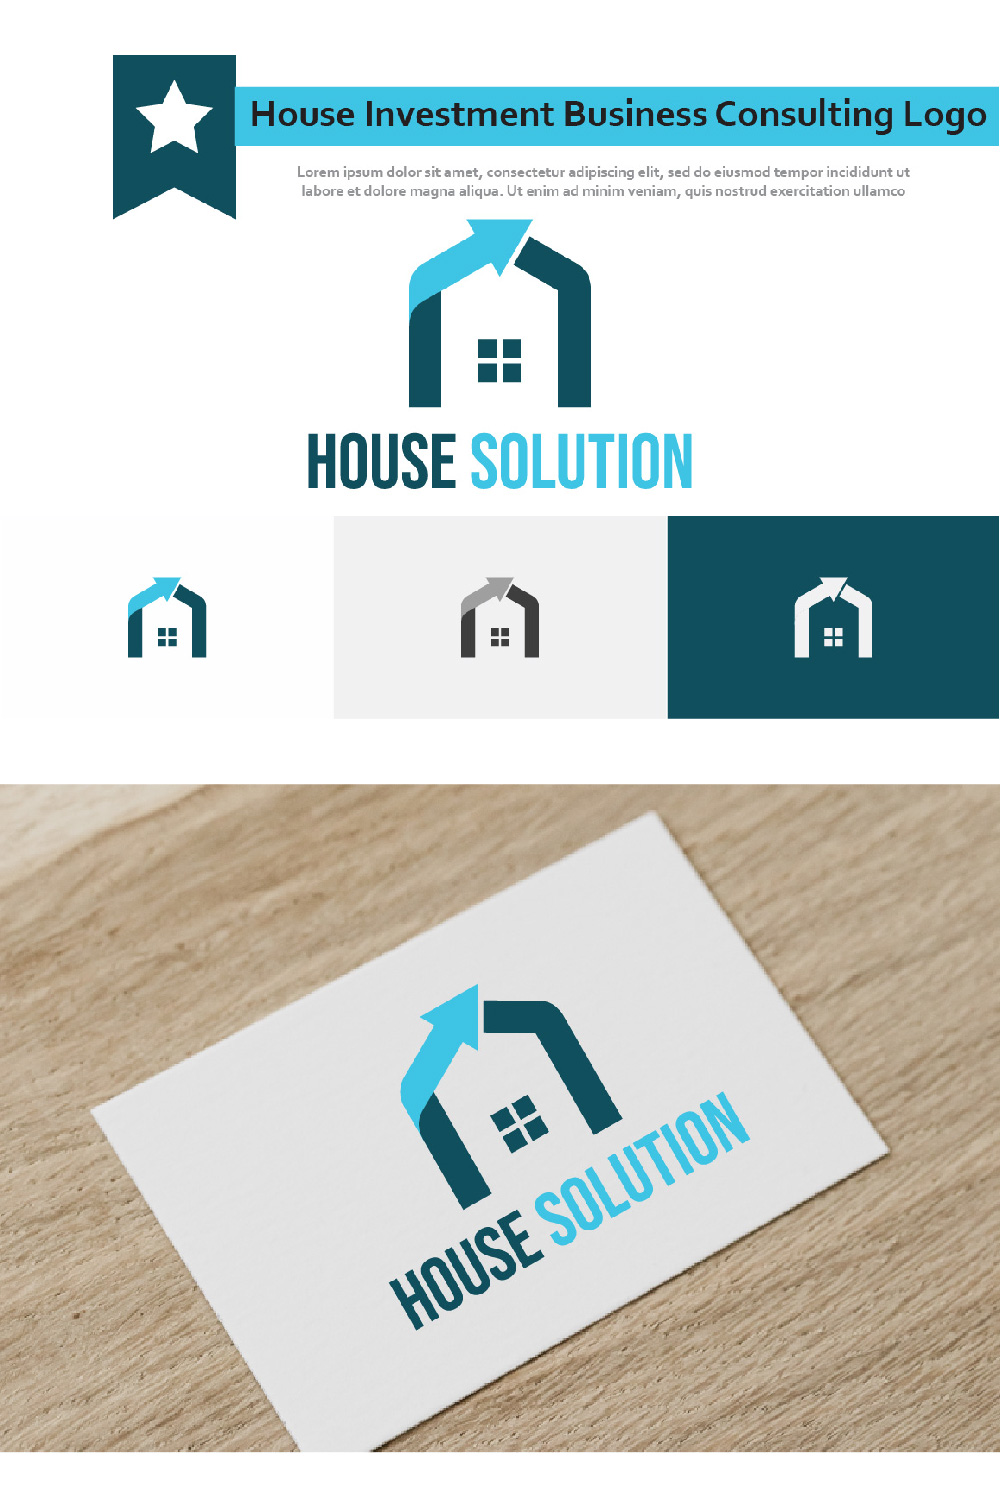 House Real Estate Realty Investment Business Consulting Solution Logo pinterest.